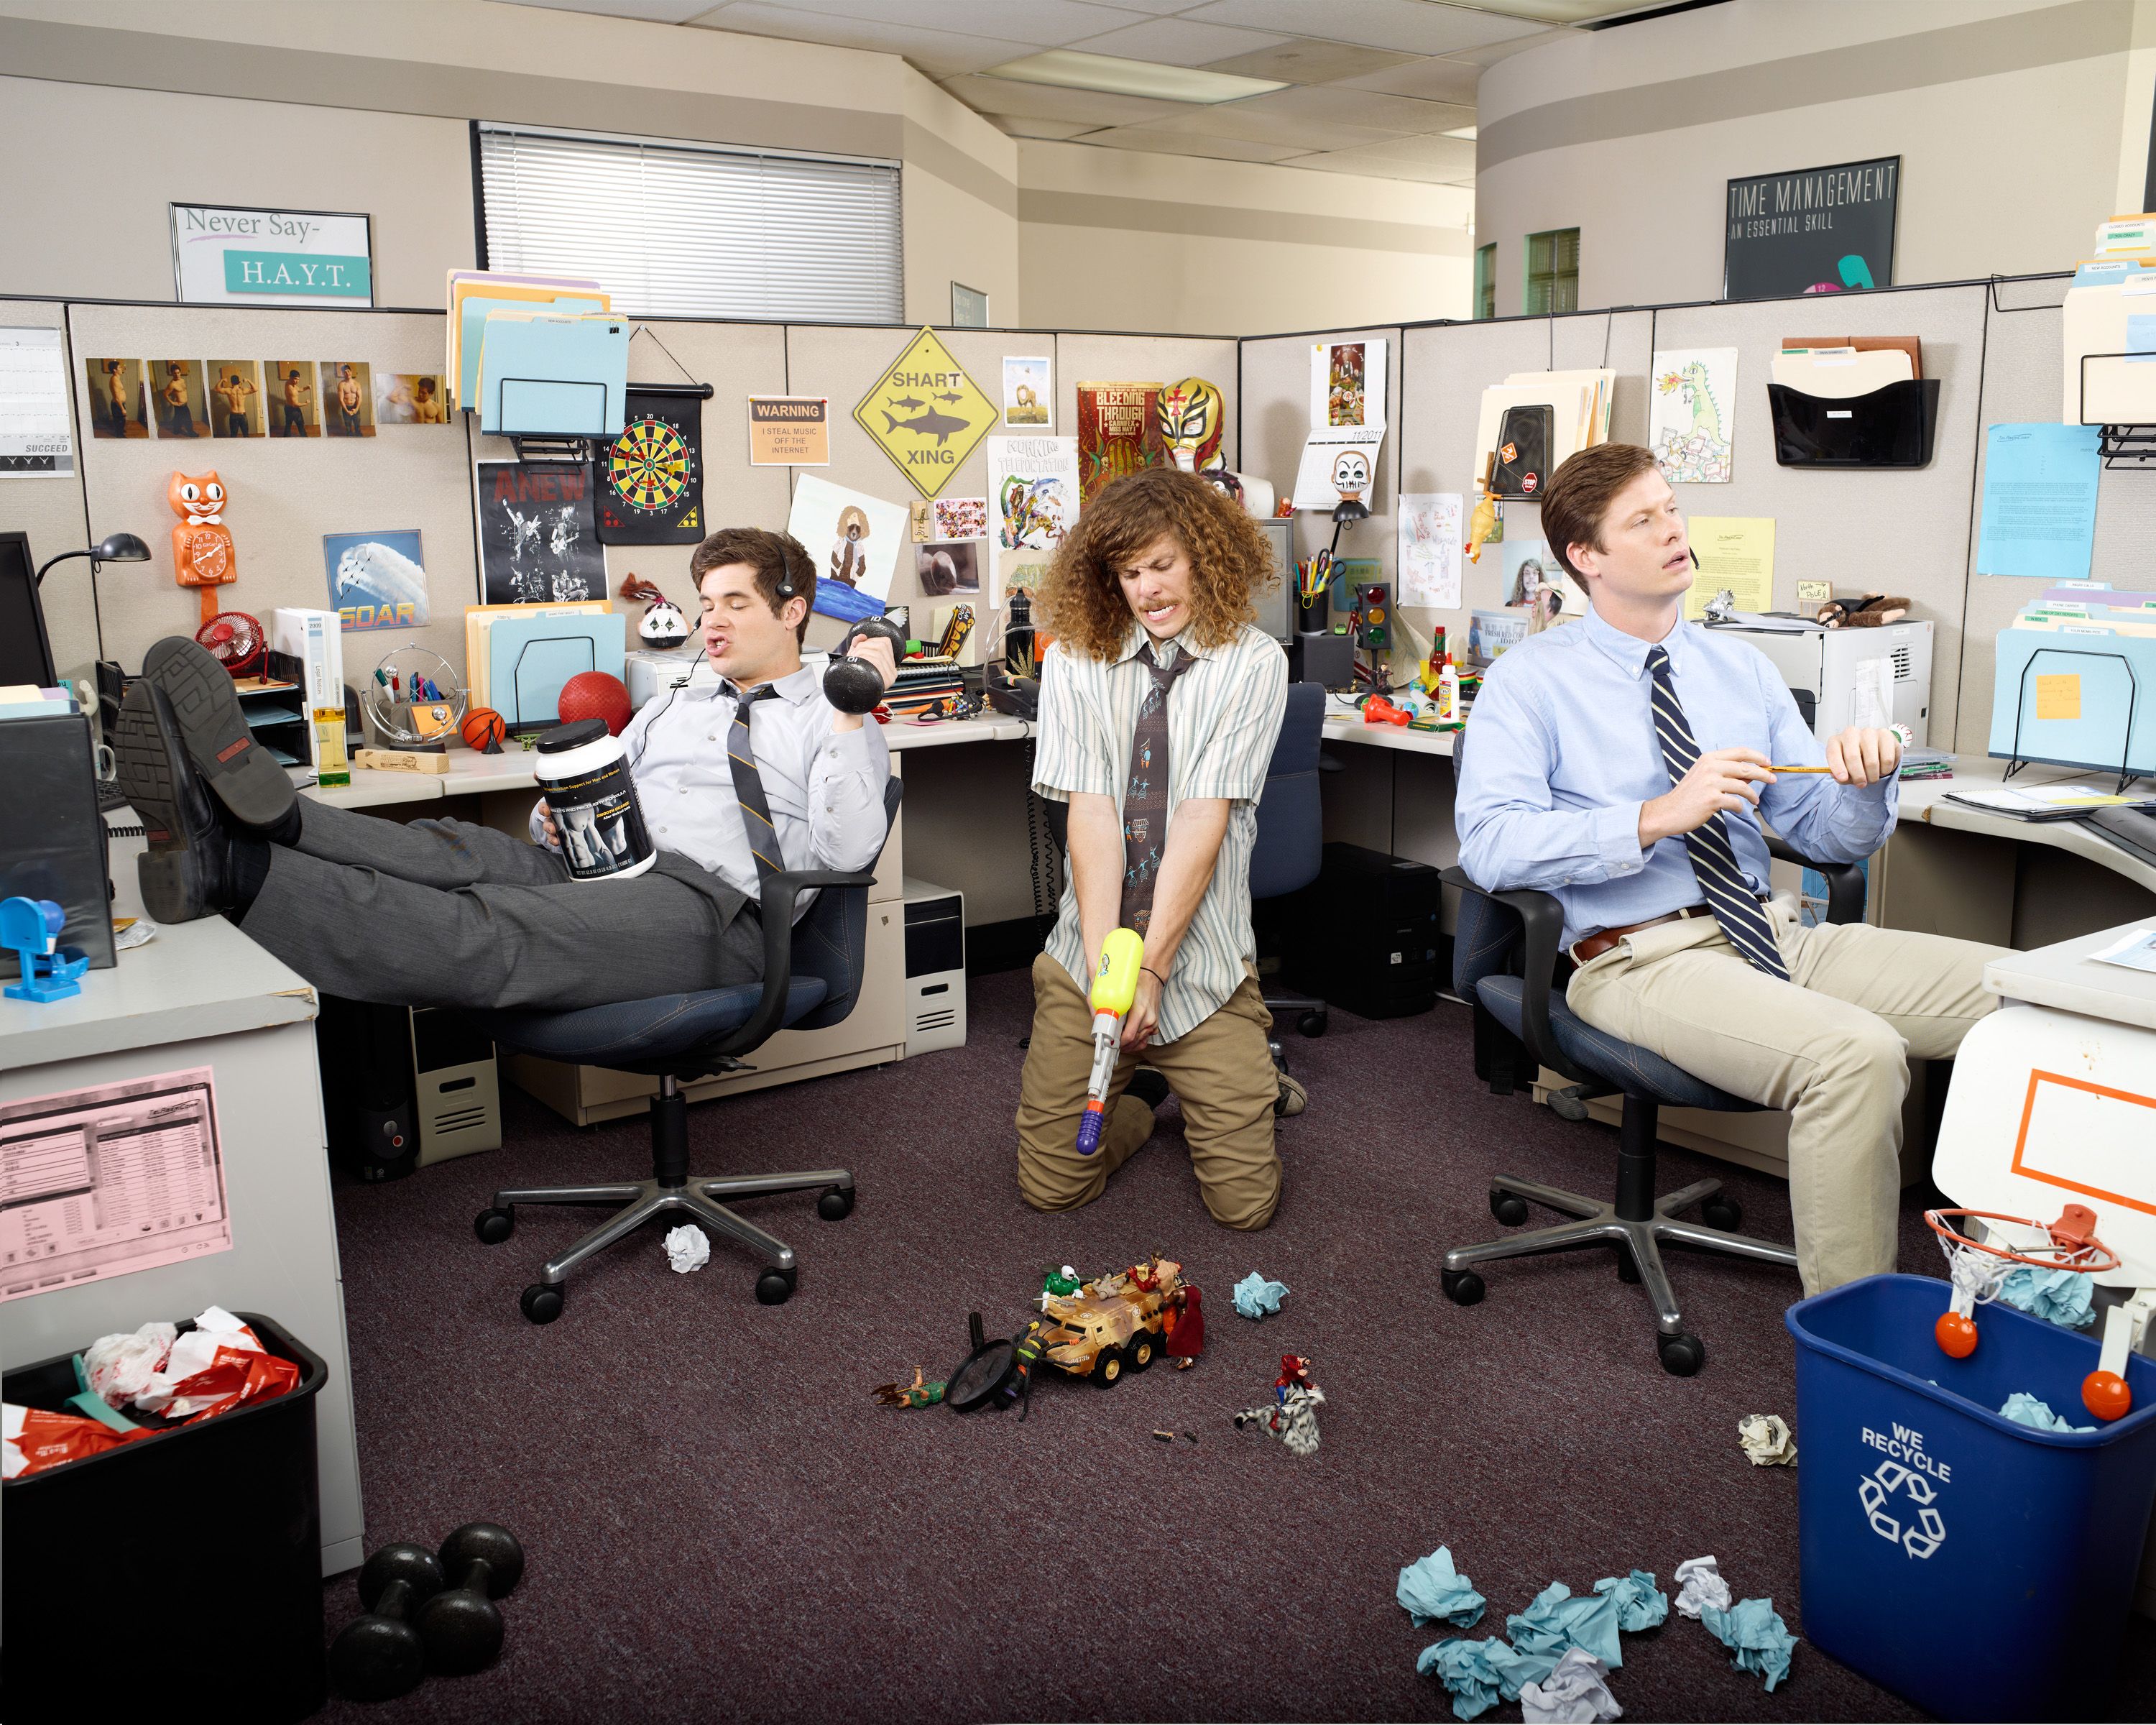 workaholics the business trip